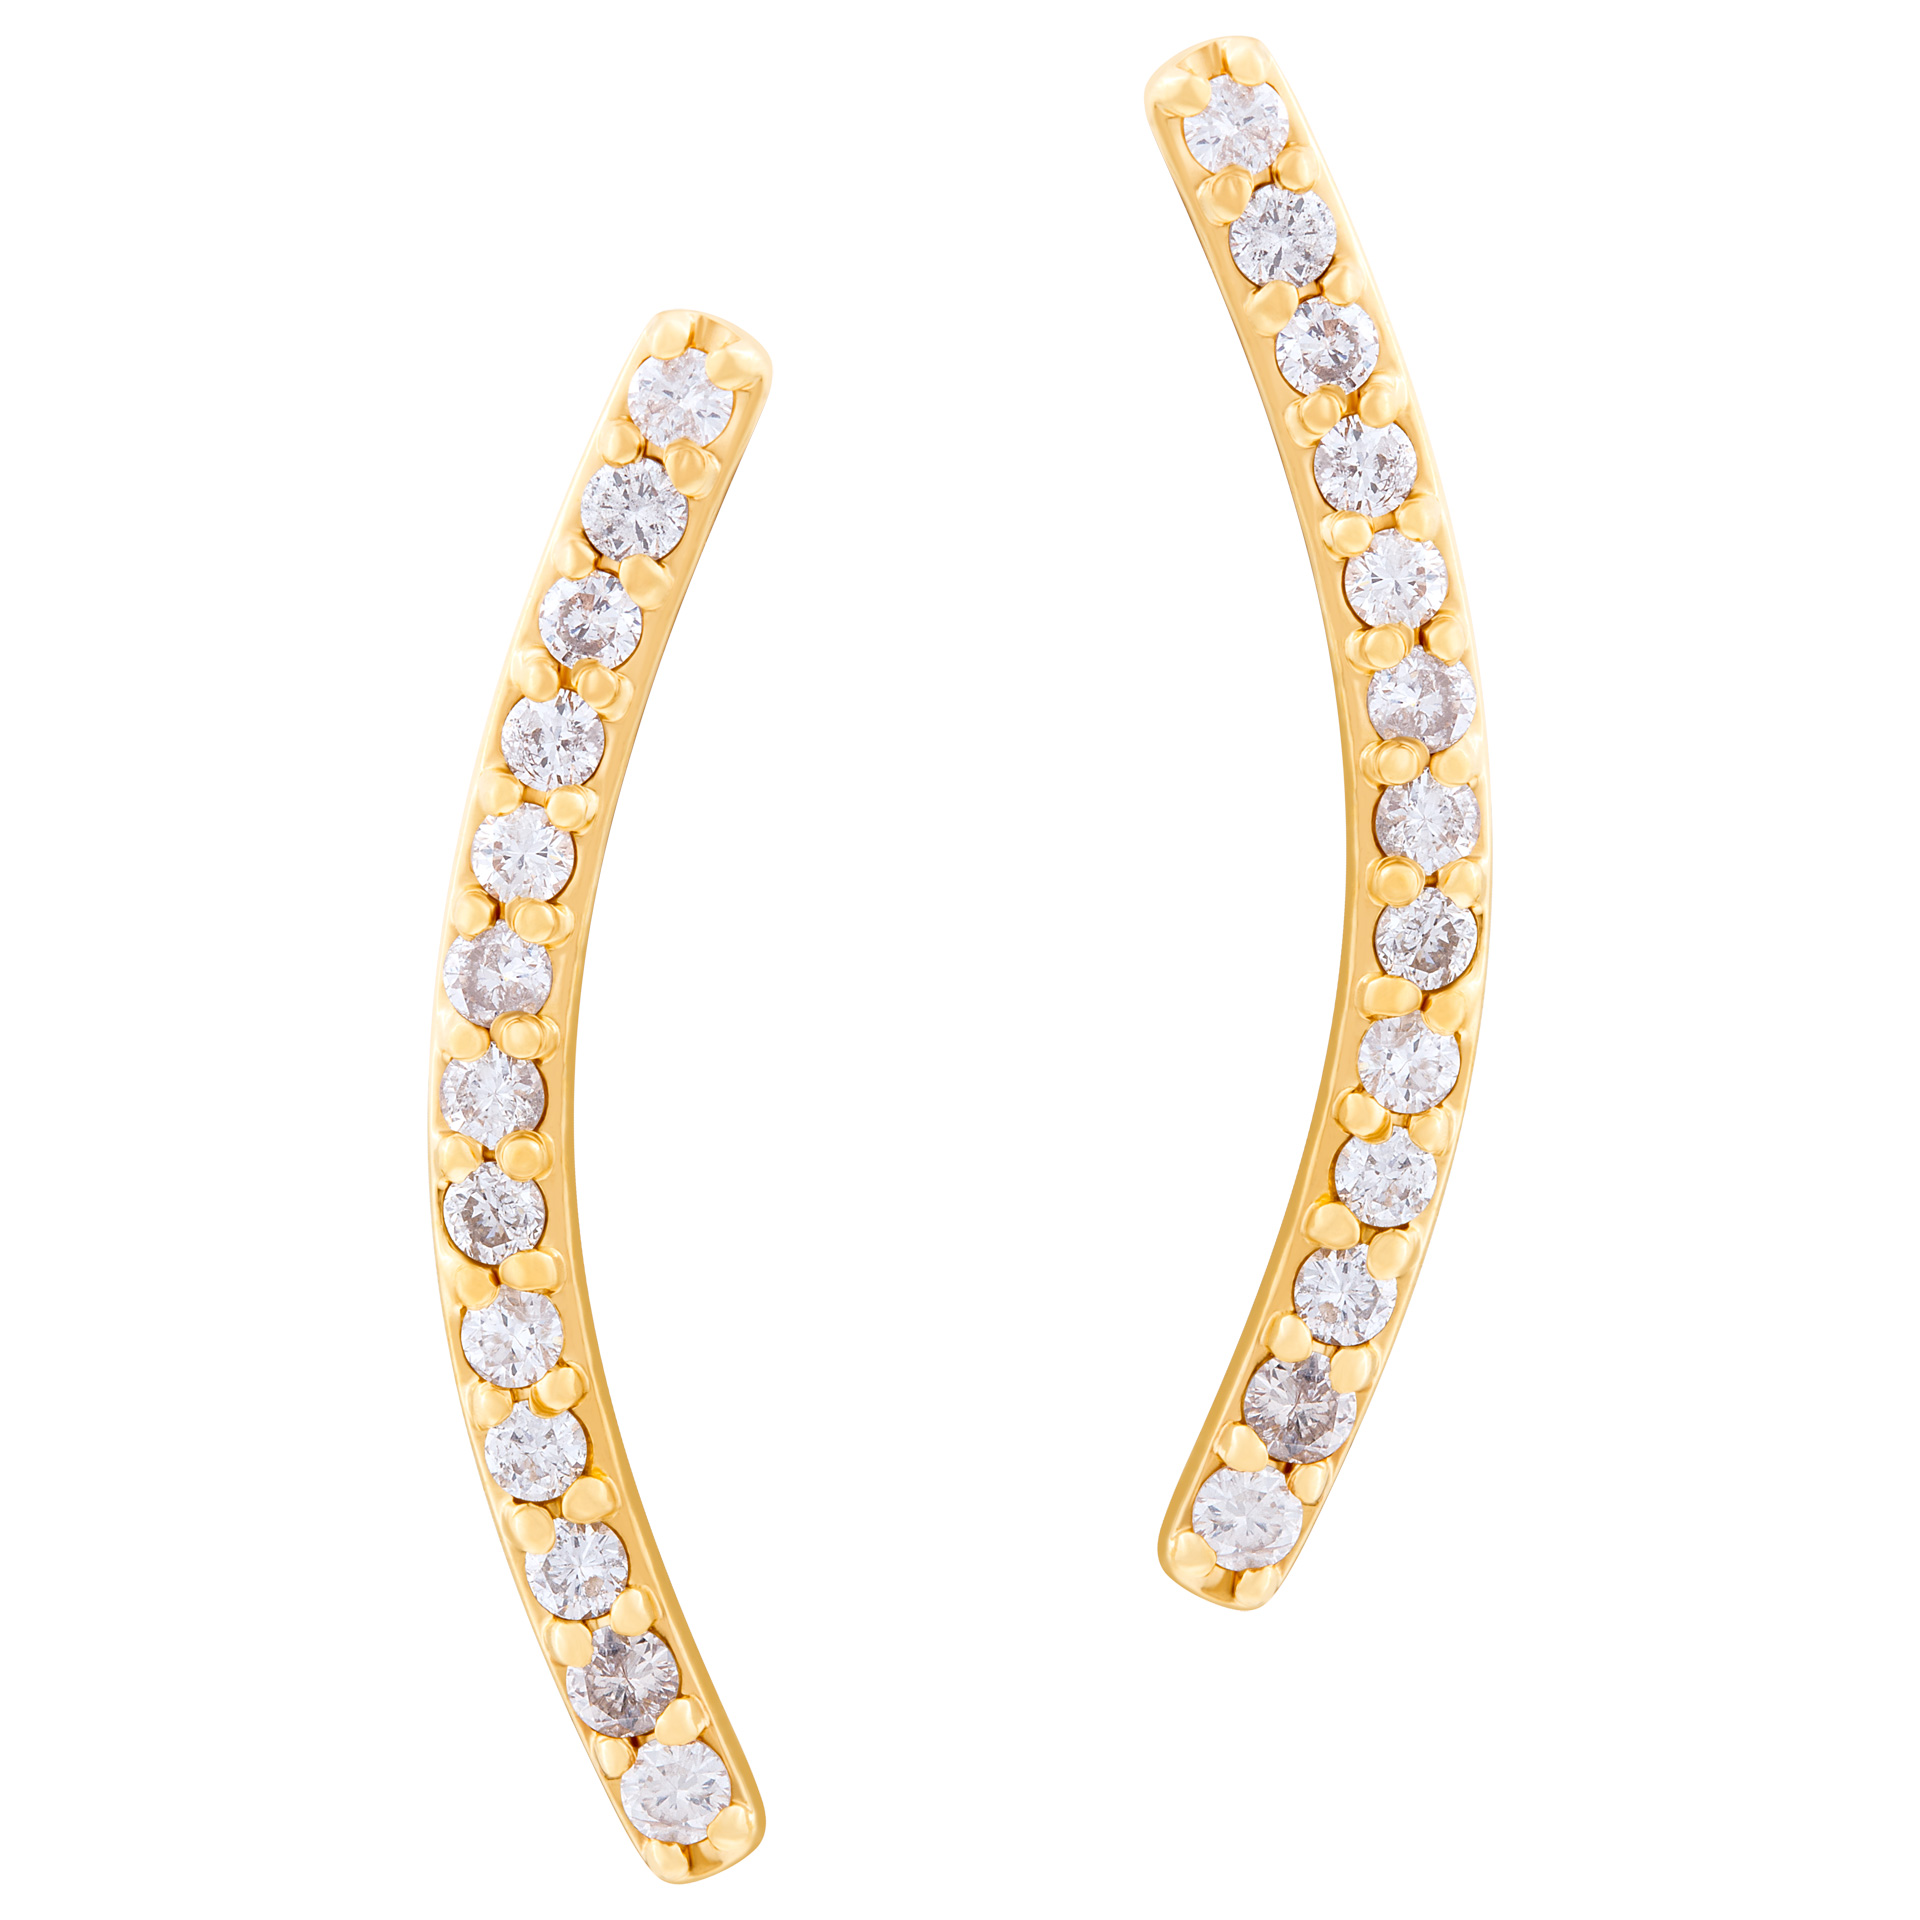 Sparkling ear climbers in 18k yelllow gold. 1.17 carats in diamonds image 1